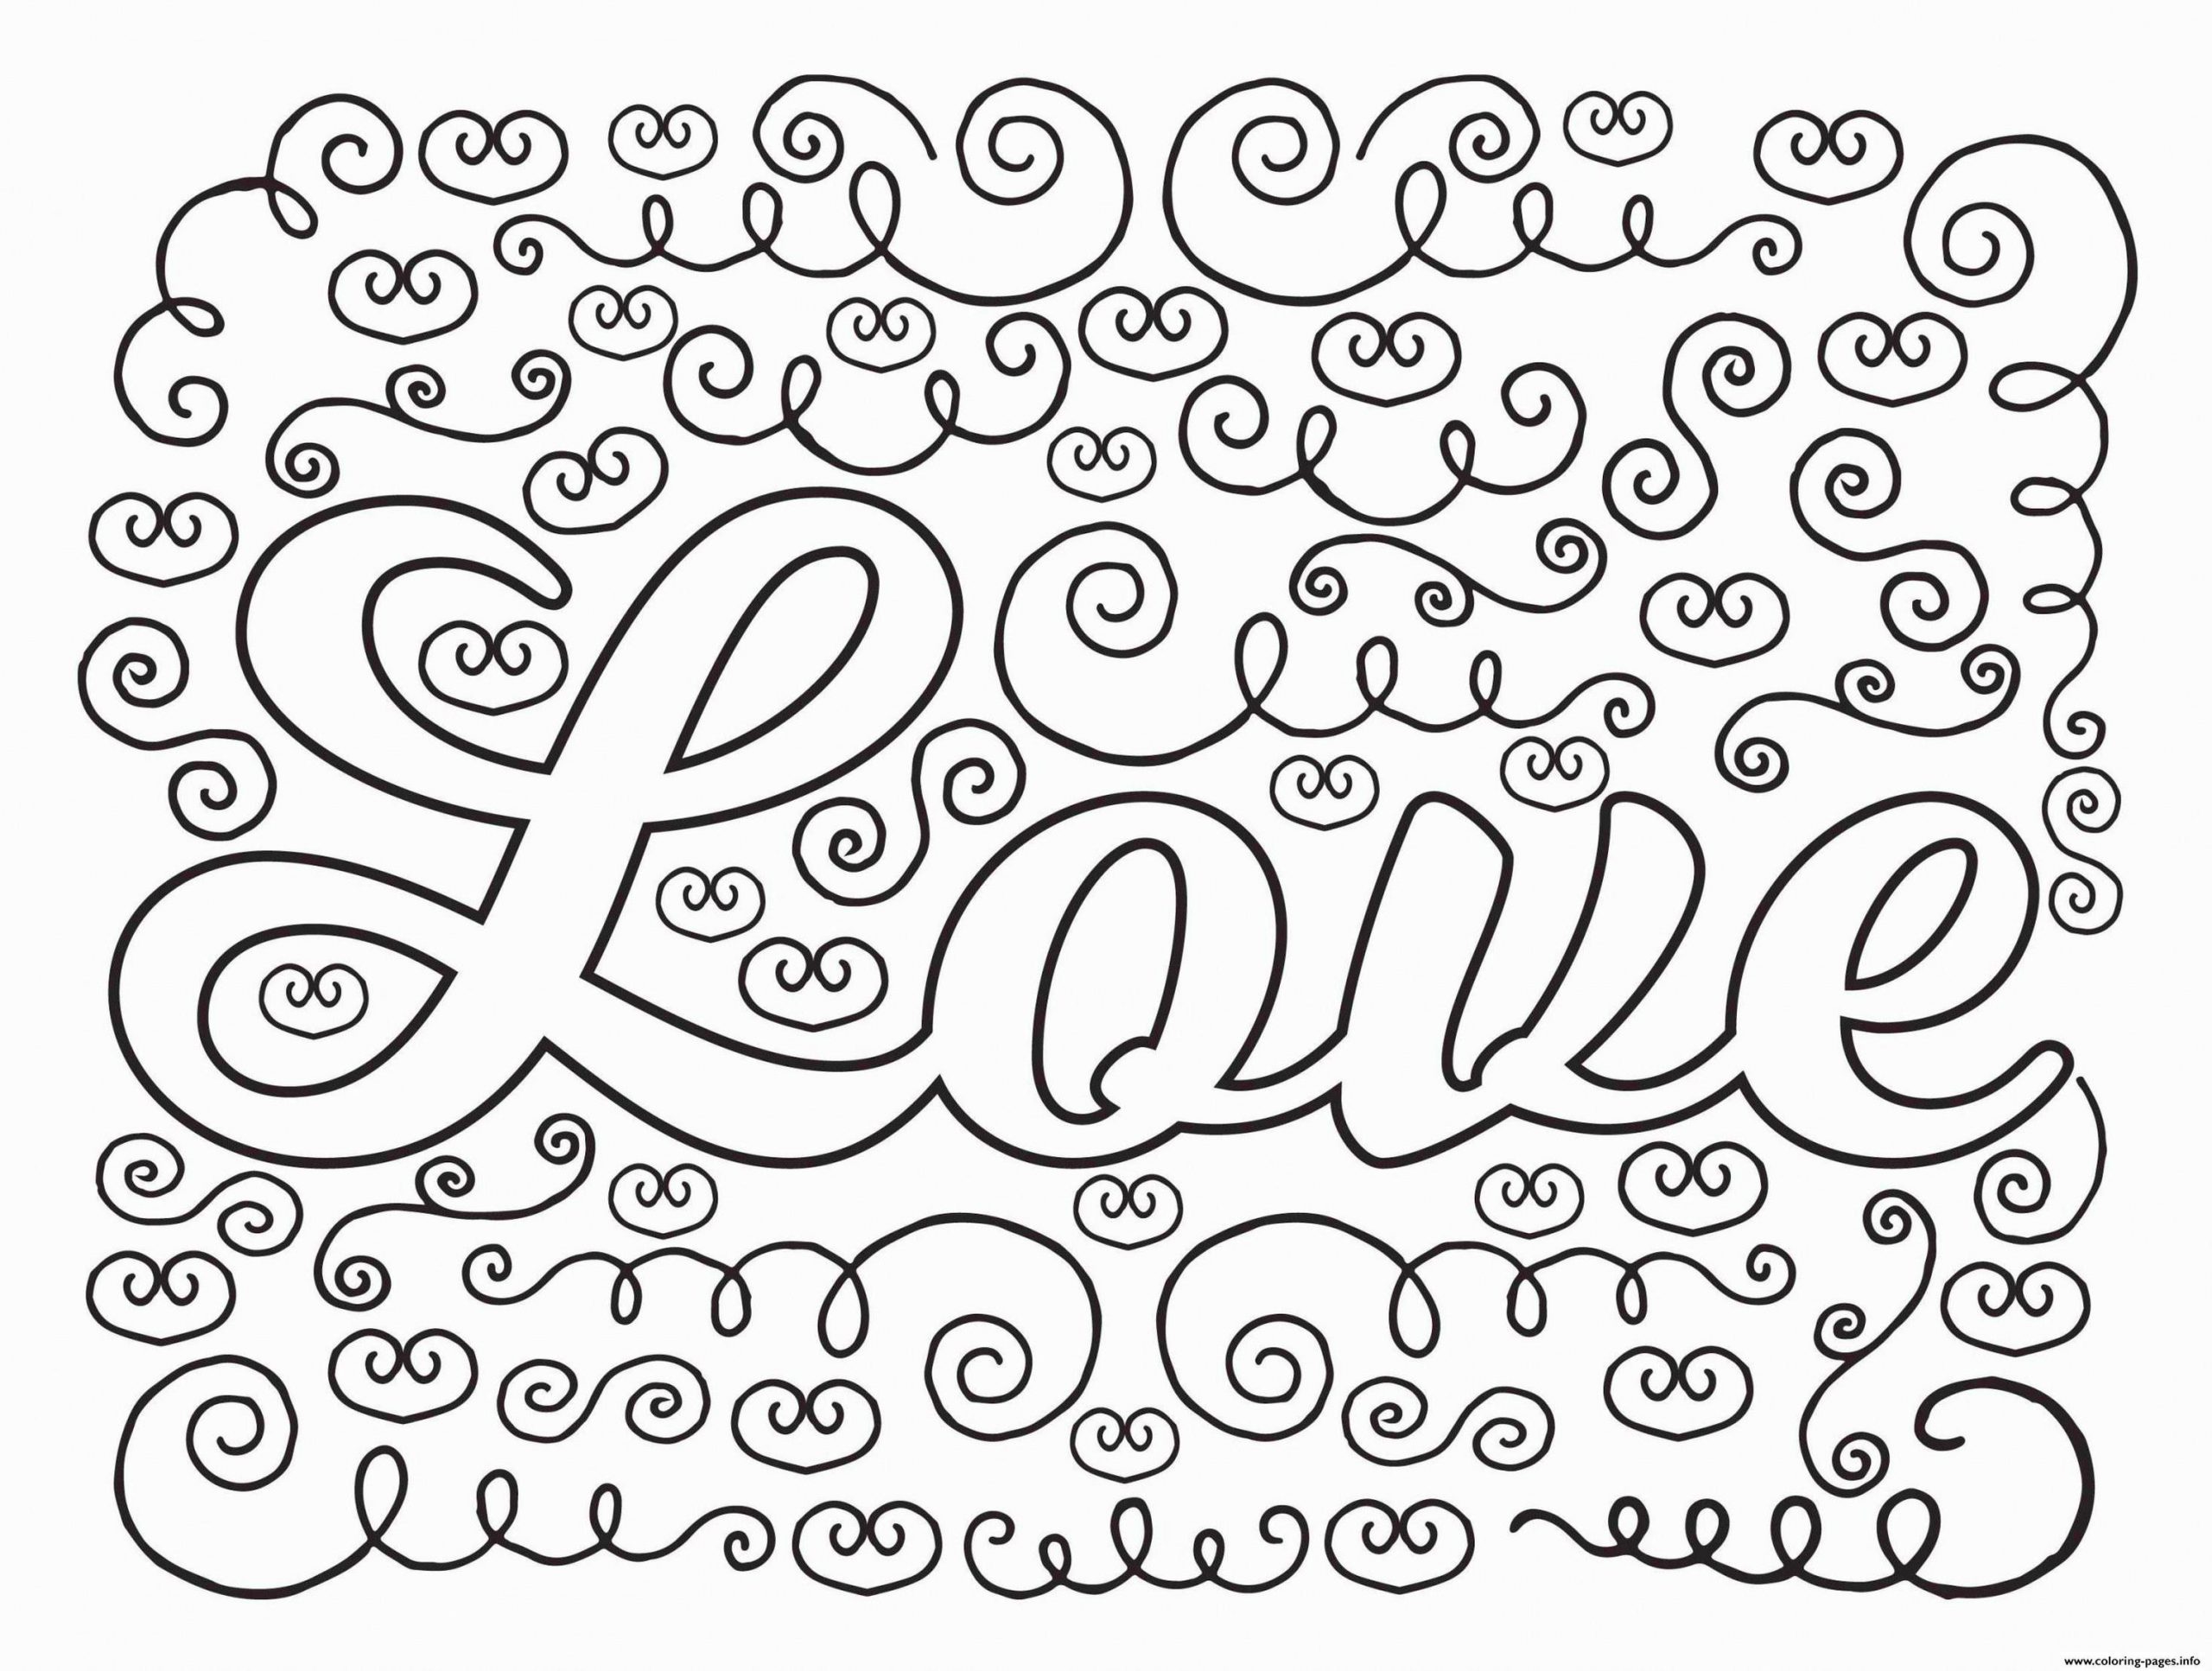 Get This Coloring Pages for Teenage Girl Easy Love Doodle 